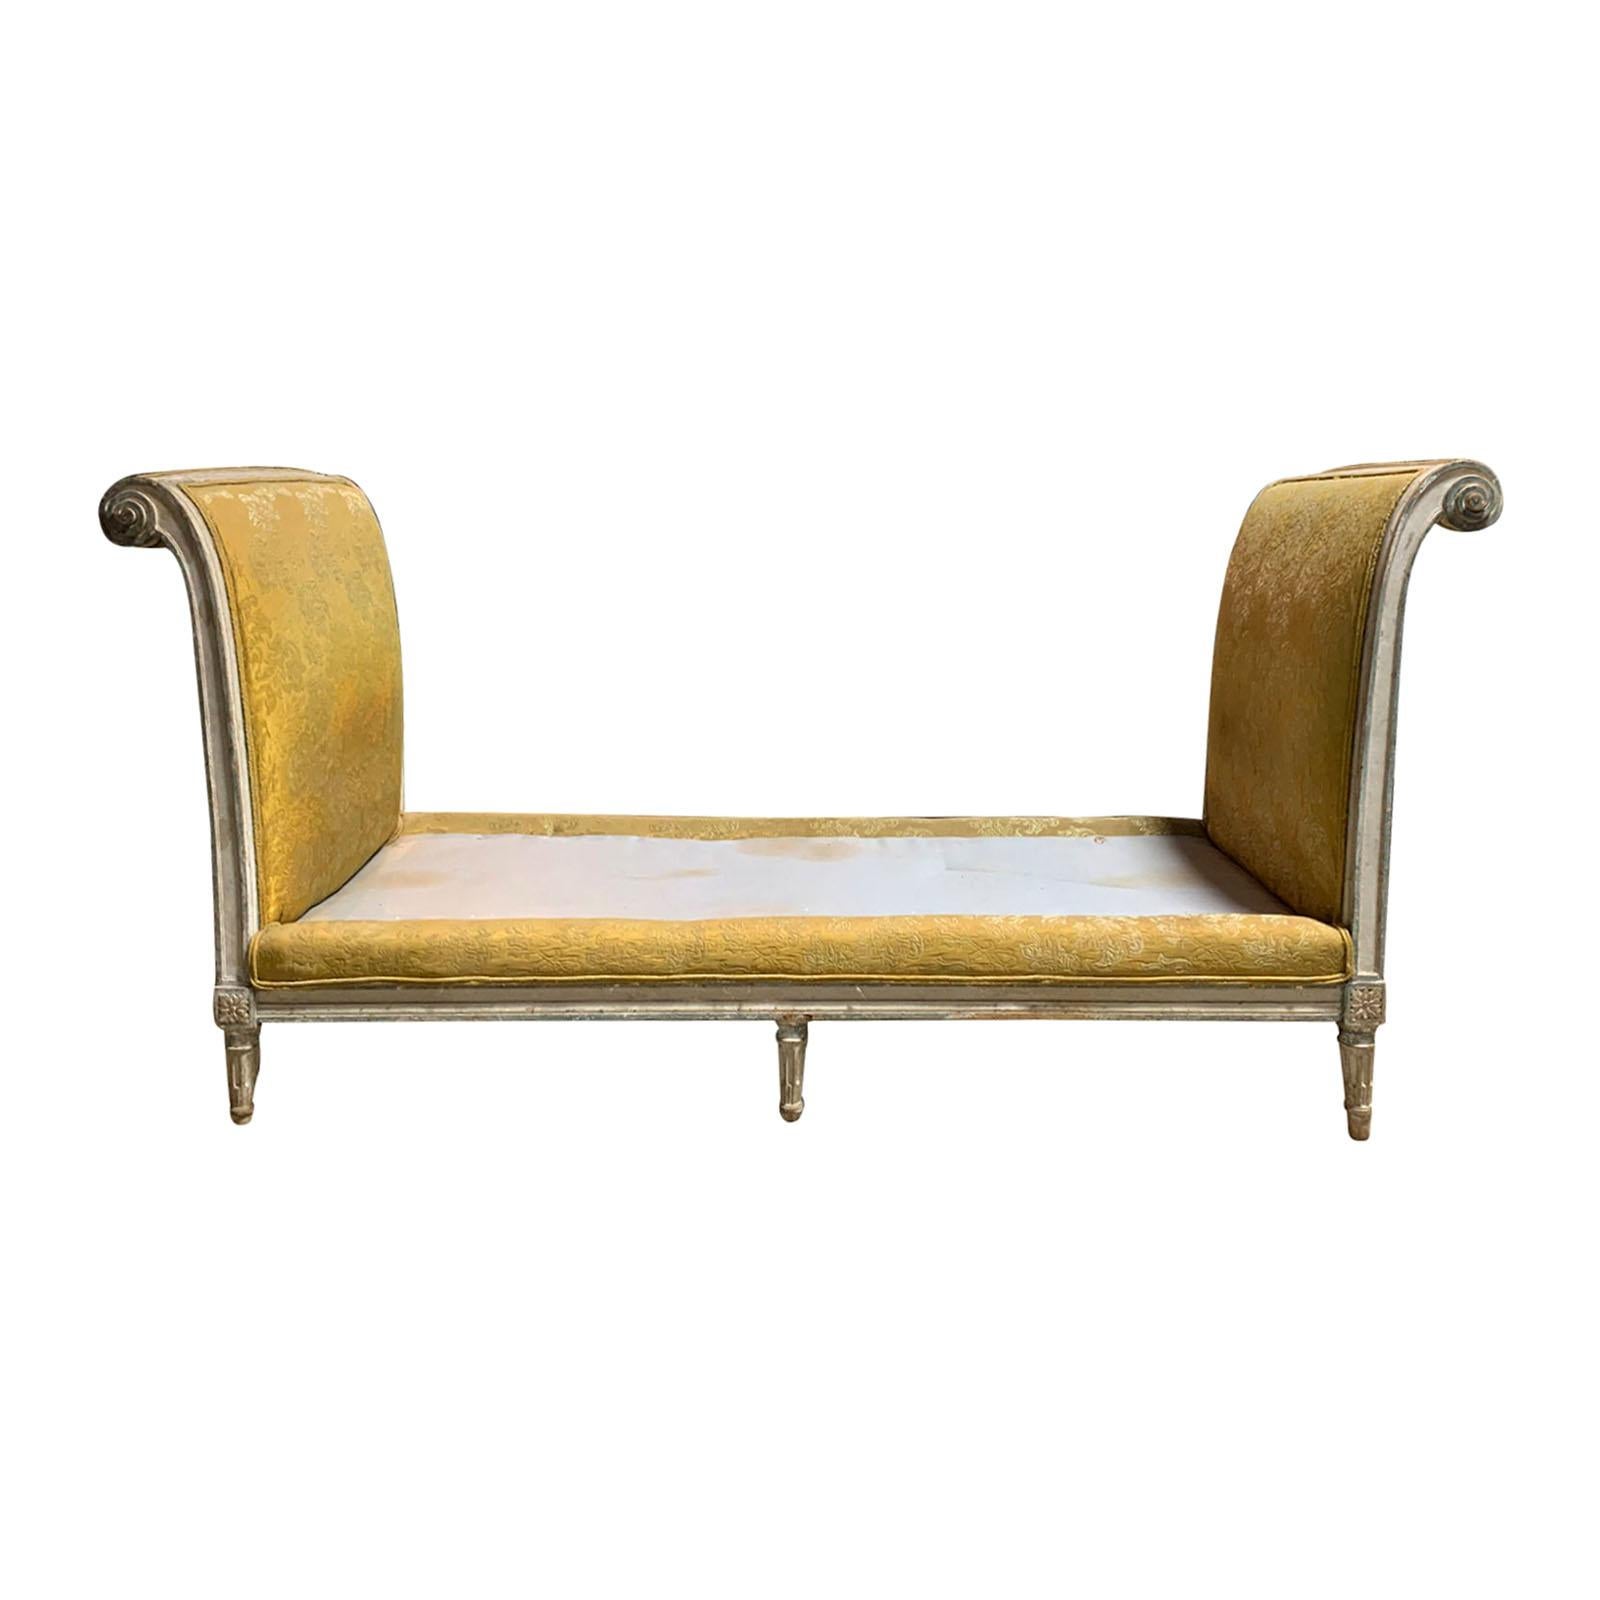 19th Century French Painted Window Bench with Silk Yellow Upholstery im Angebot